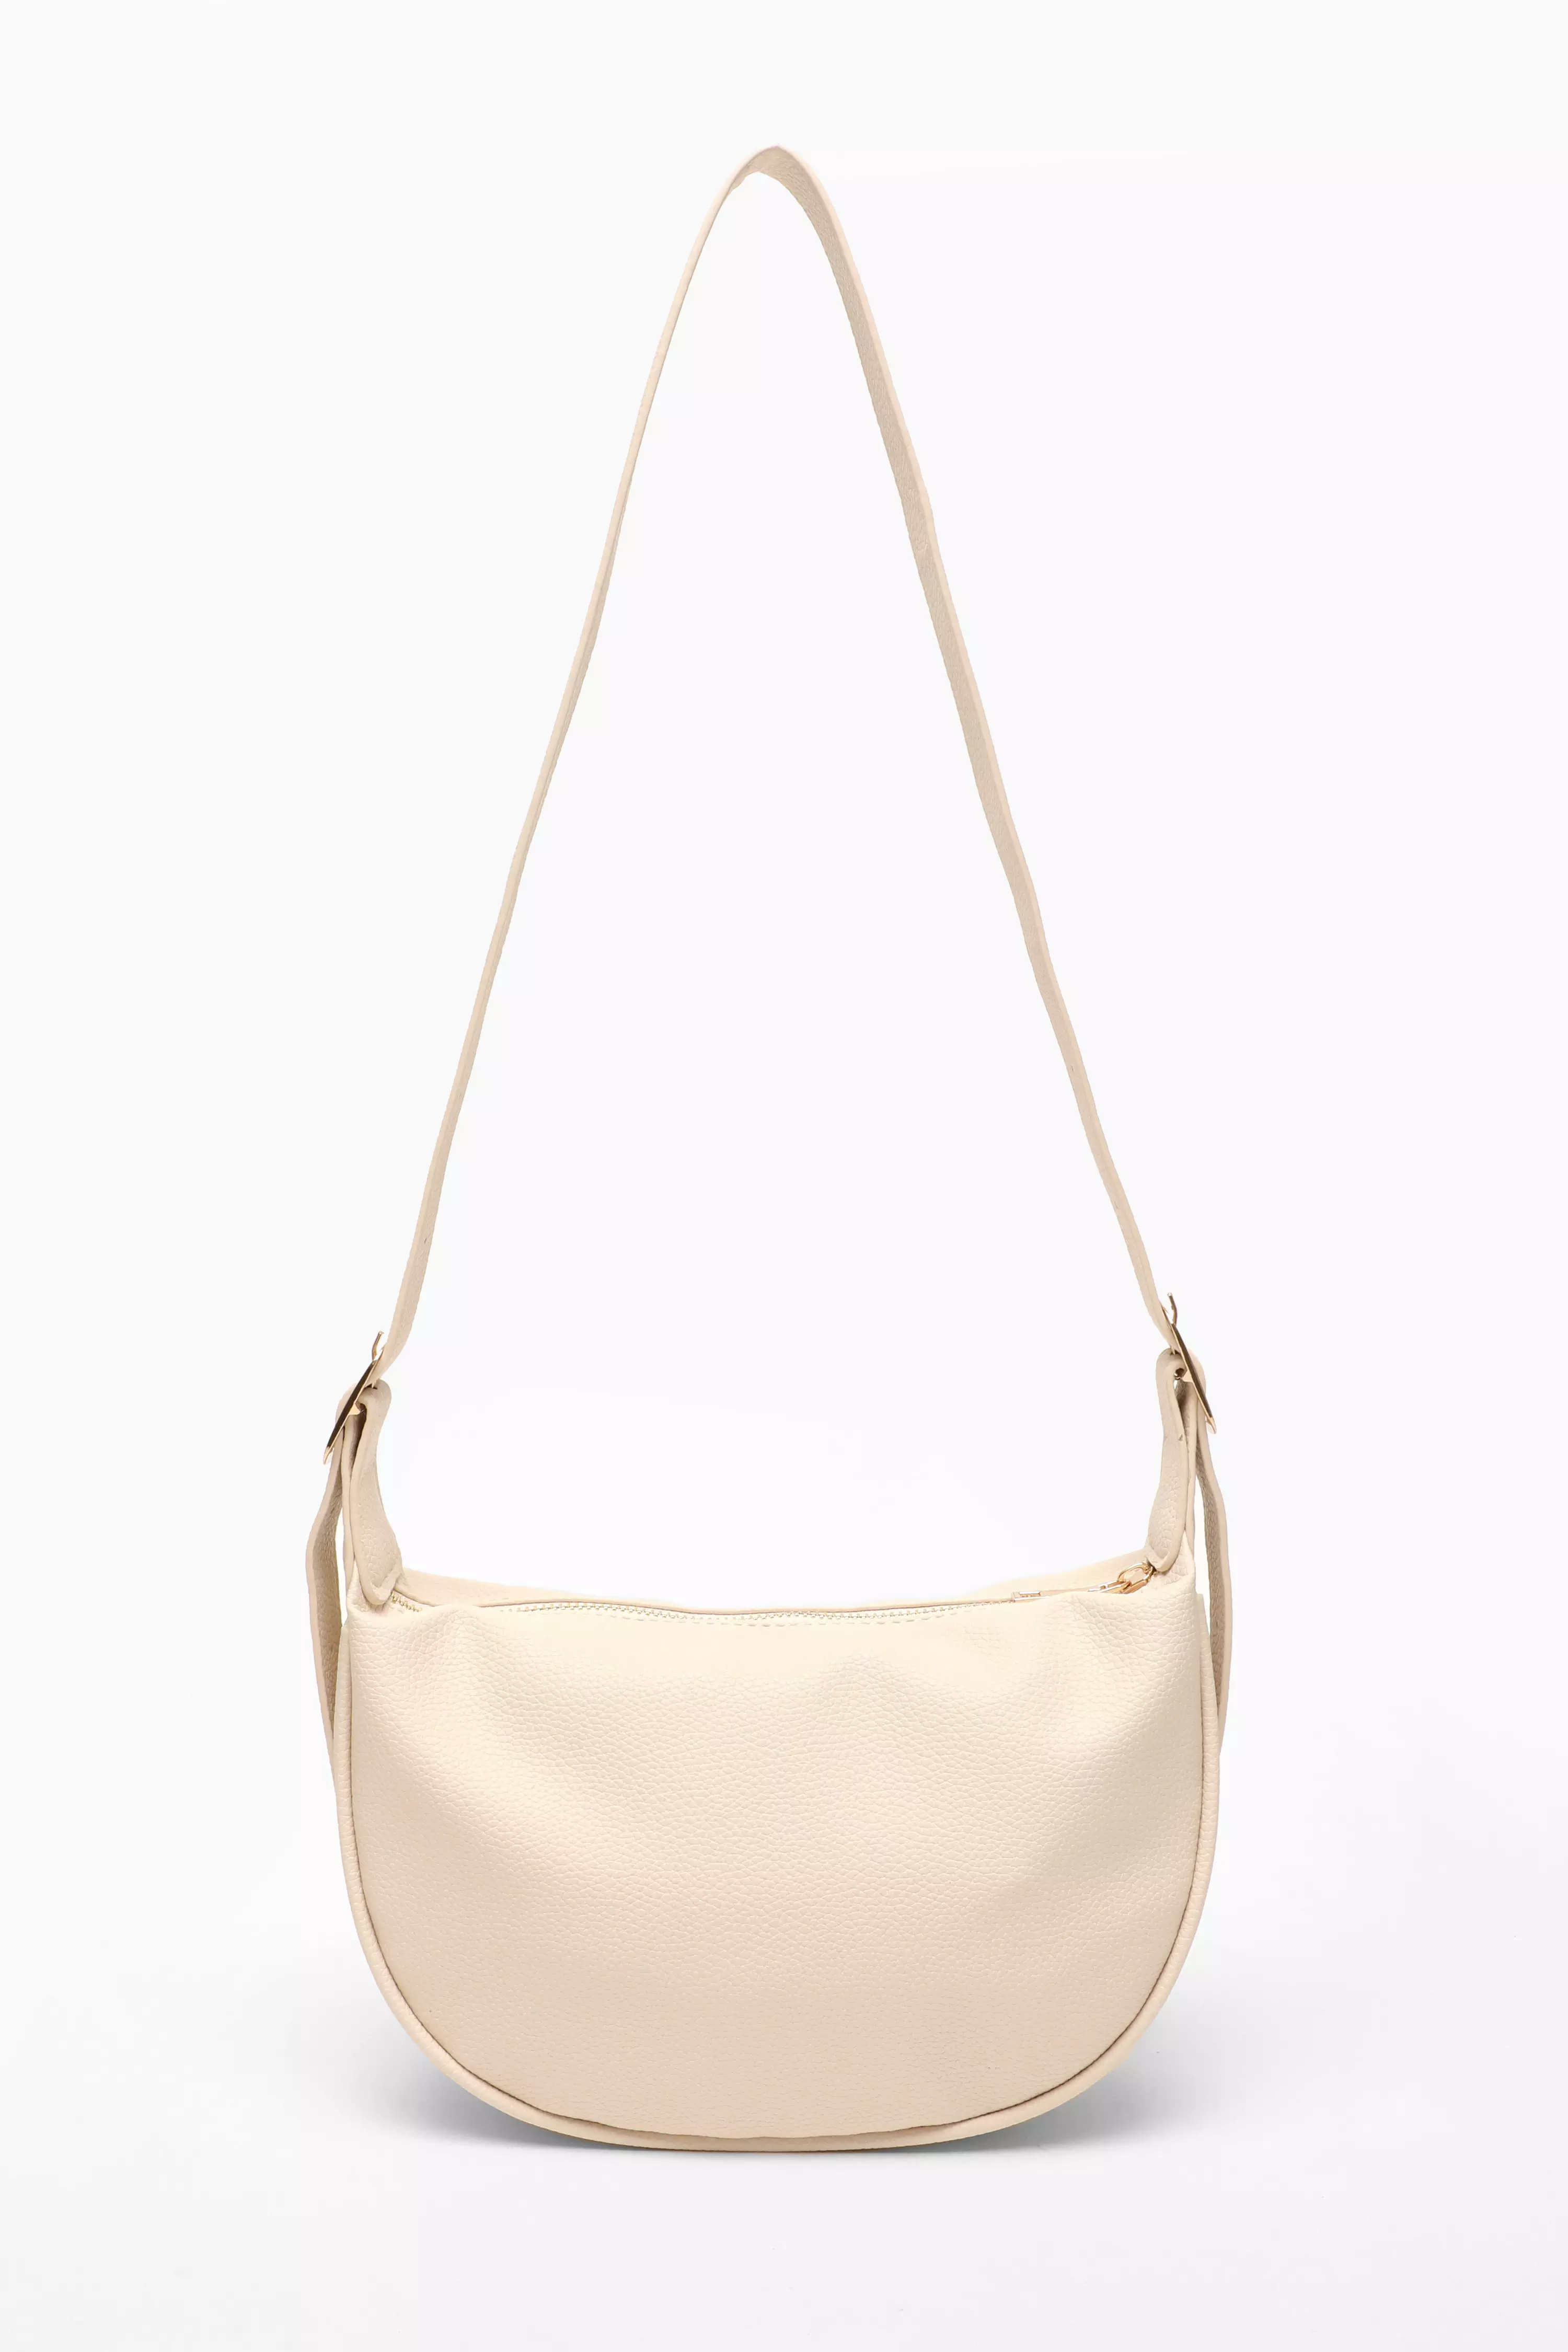 Cream Faux Leather Round Cross Body Bag